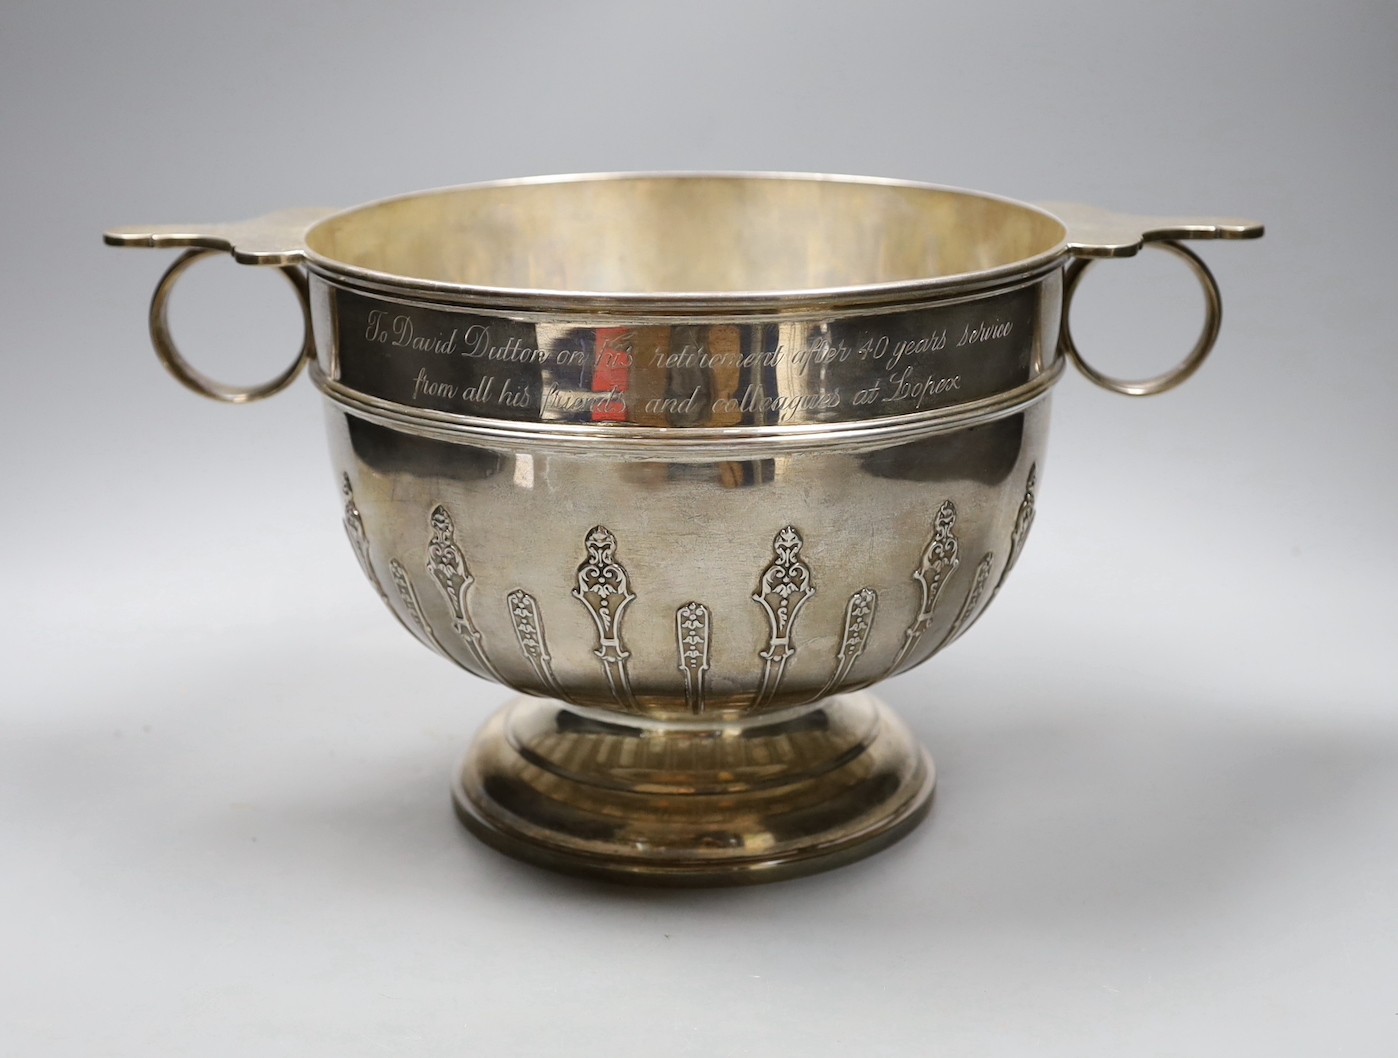 A late Victorian two handled silver rose bowl, with strapwork decoration and later presentation inscription, London 1900, 1532 grams, 35cm over handles, height 18cm